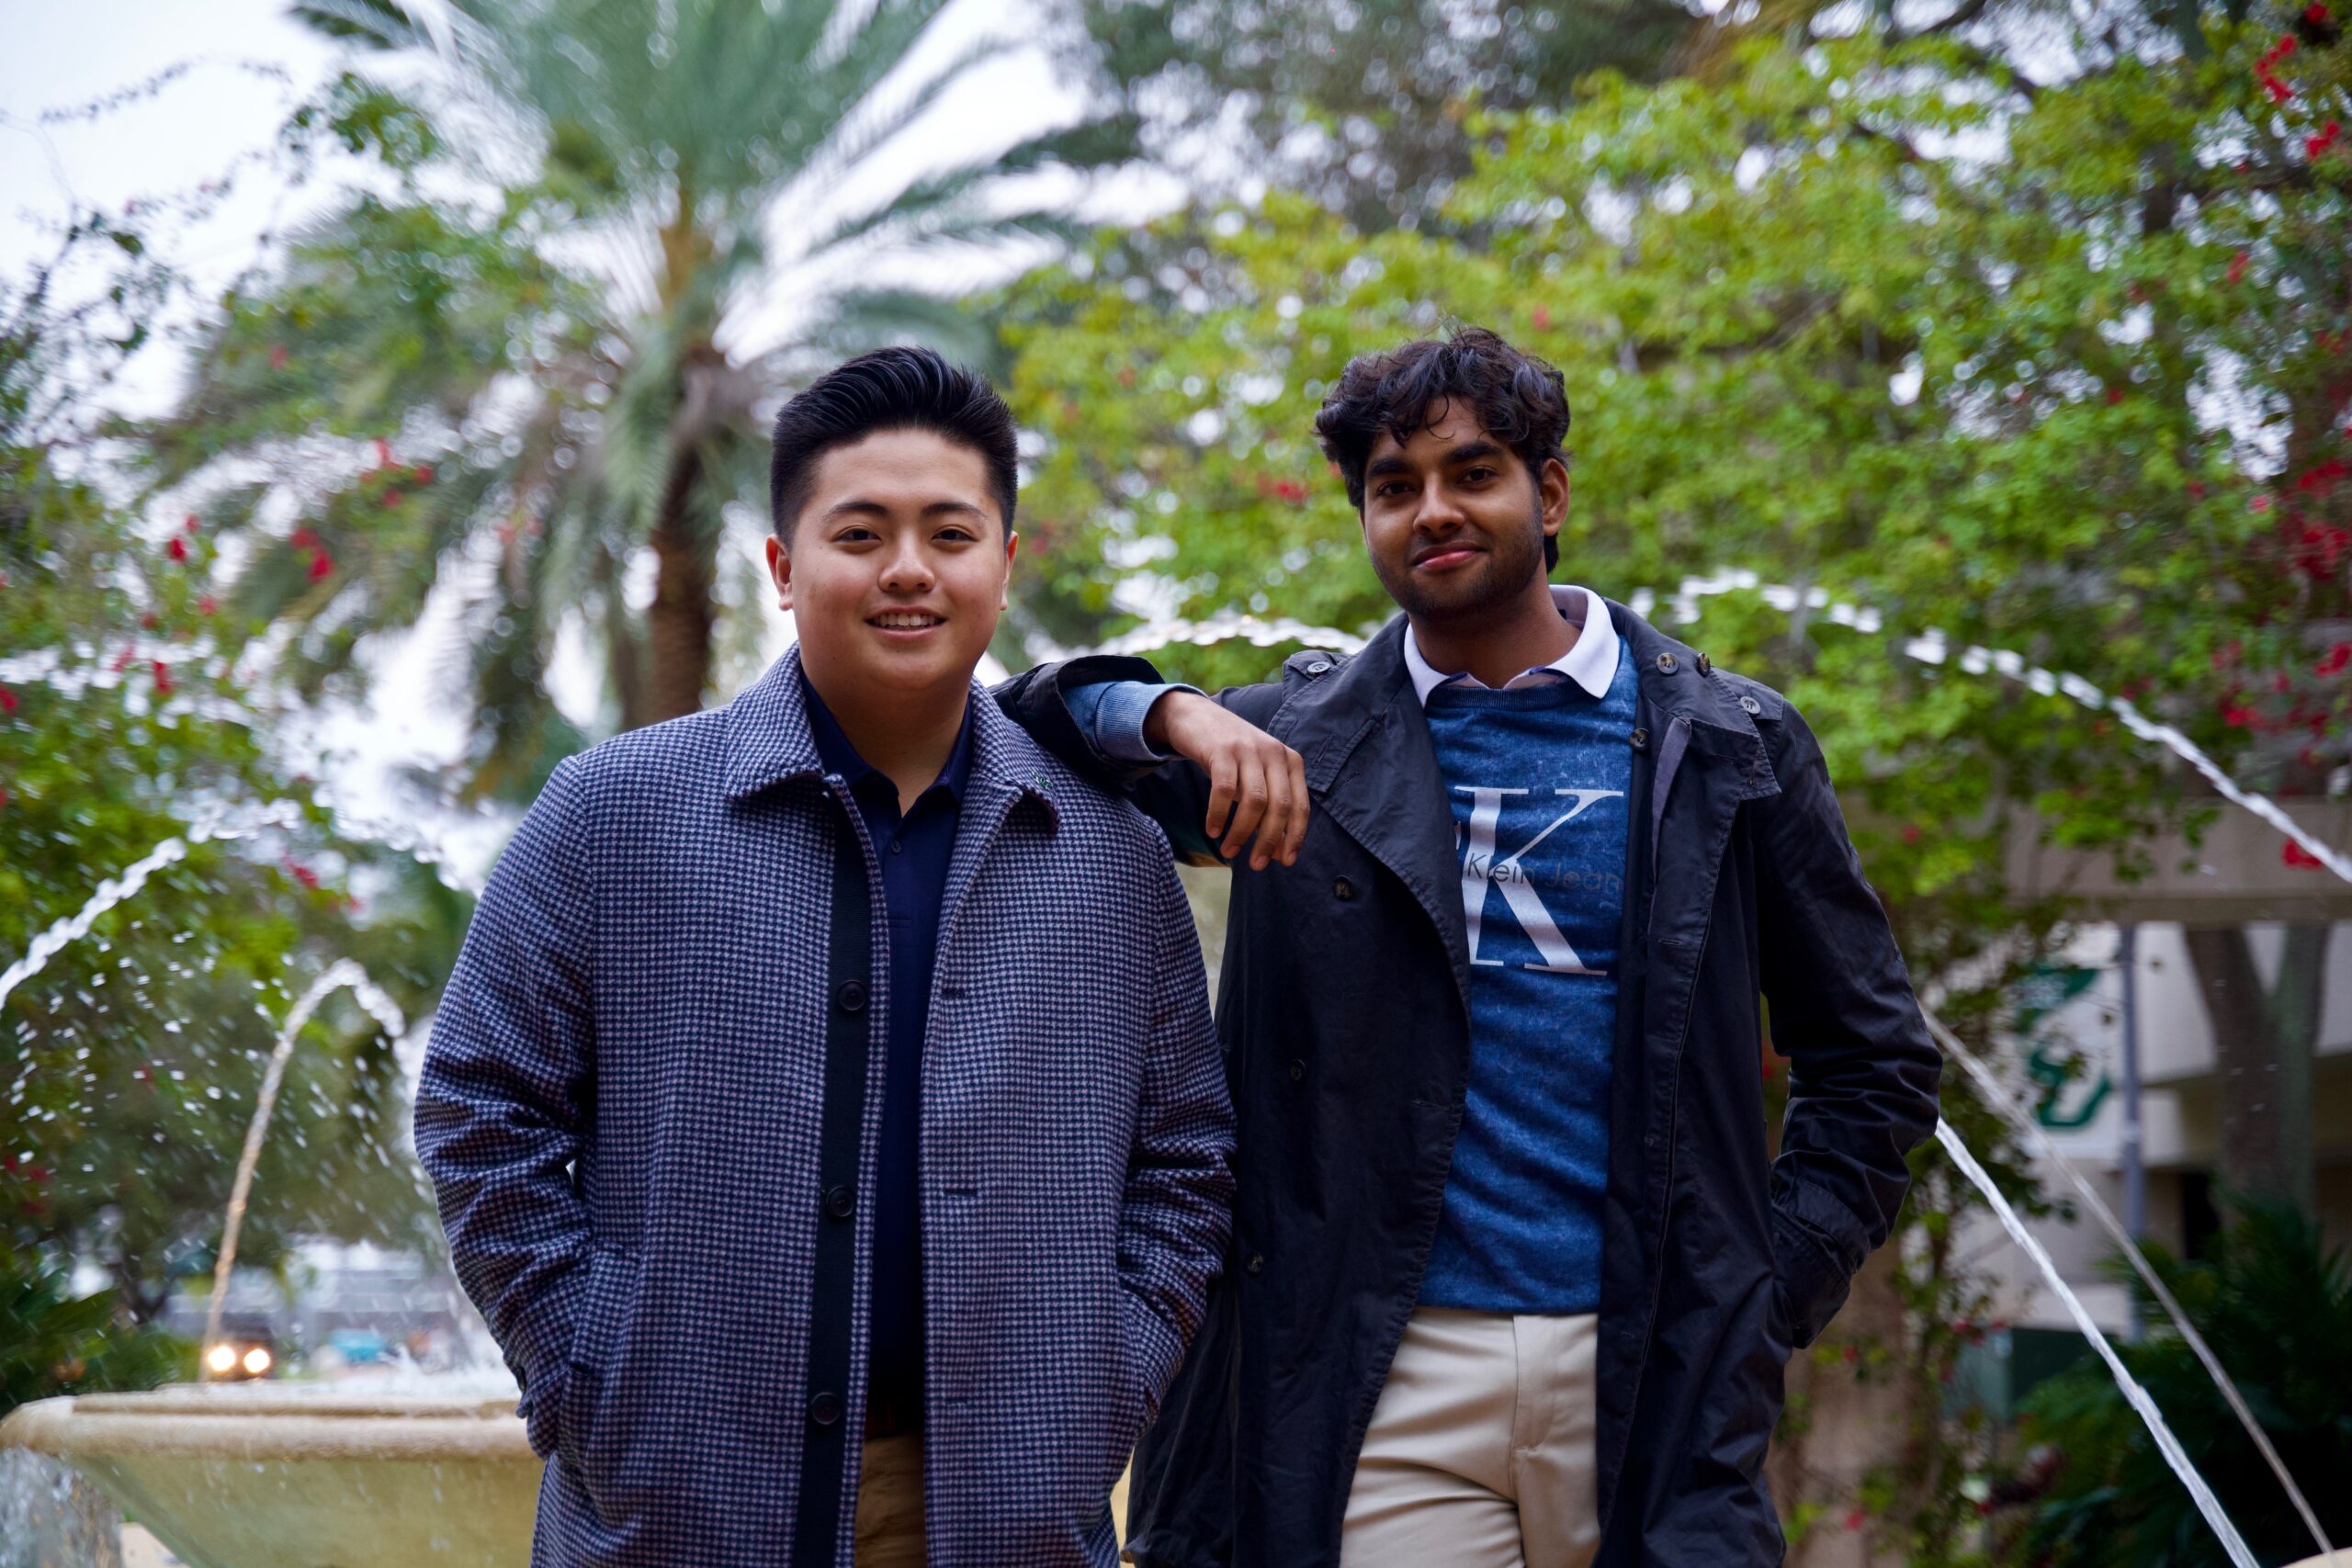 Meet the candidates: Tony Tran and Rughved Brahman